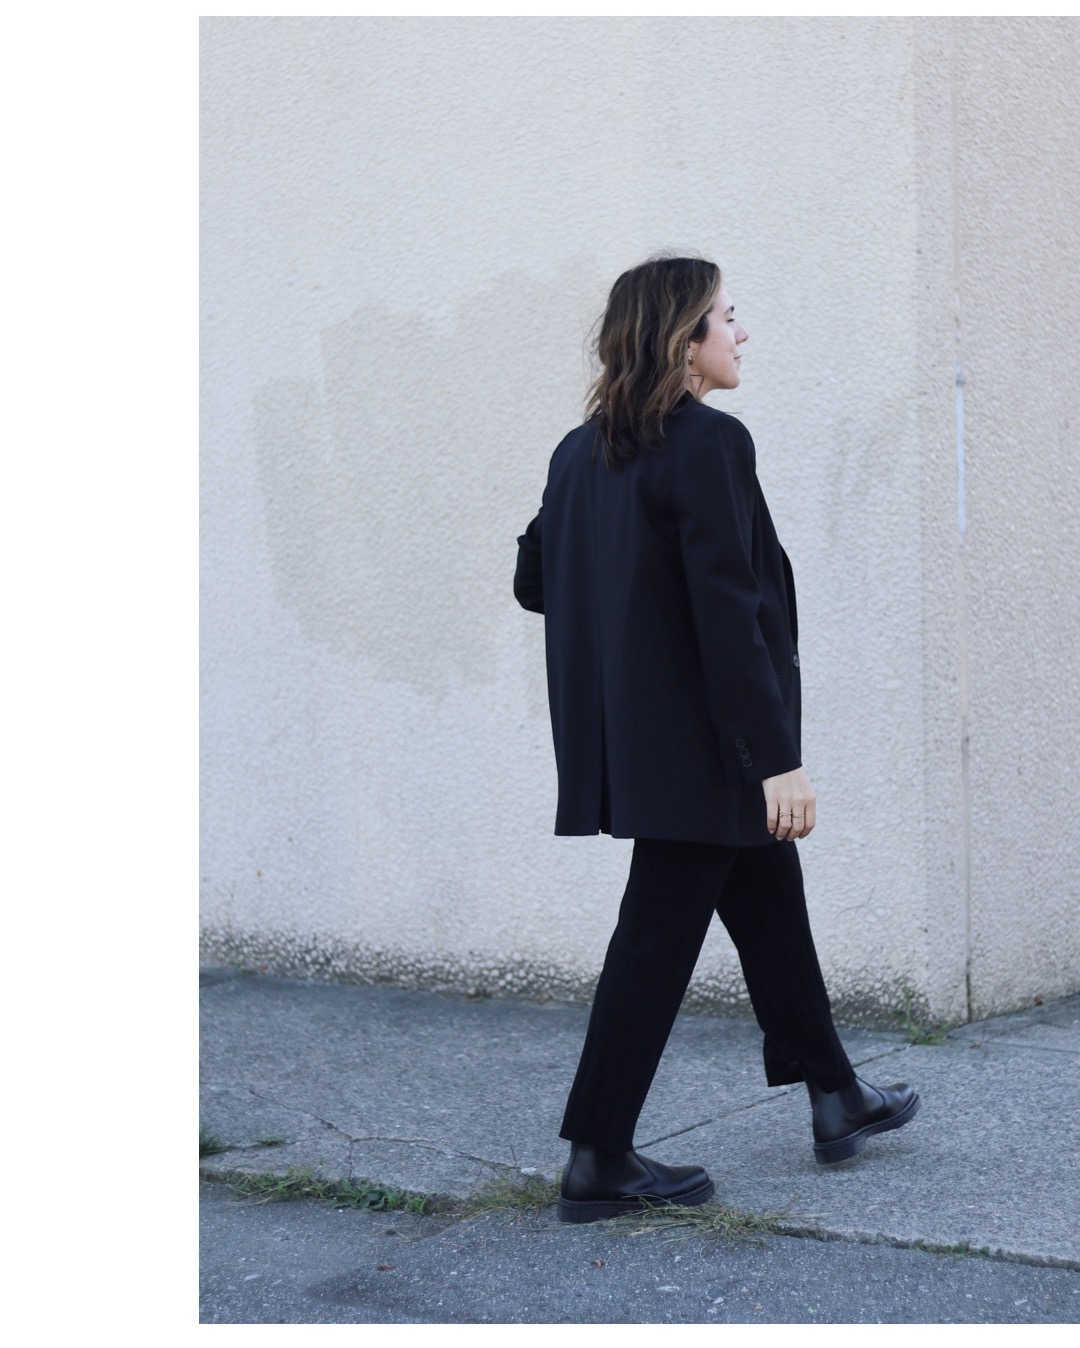 fall outfit hm knit pants aritzia agency blazer dr martens chelsea boots outfit